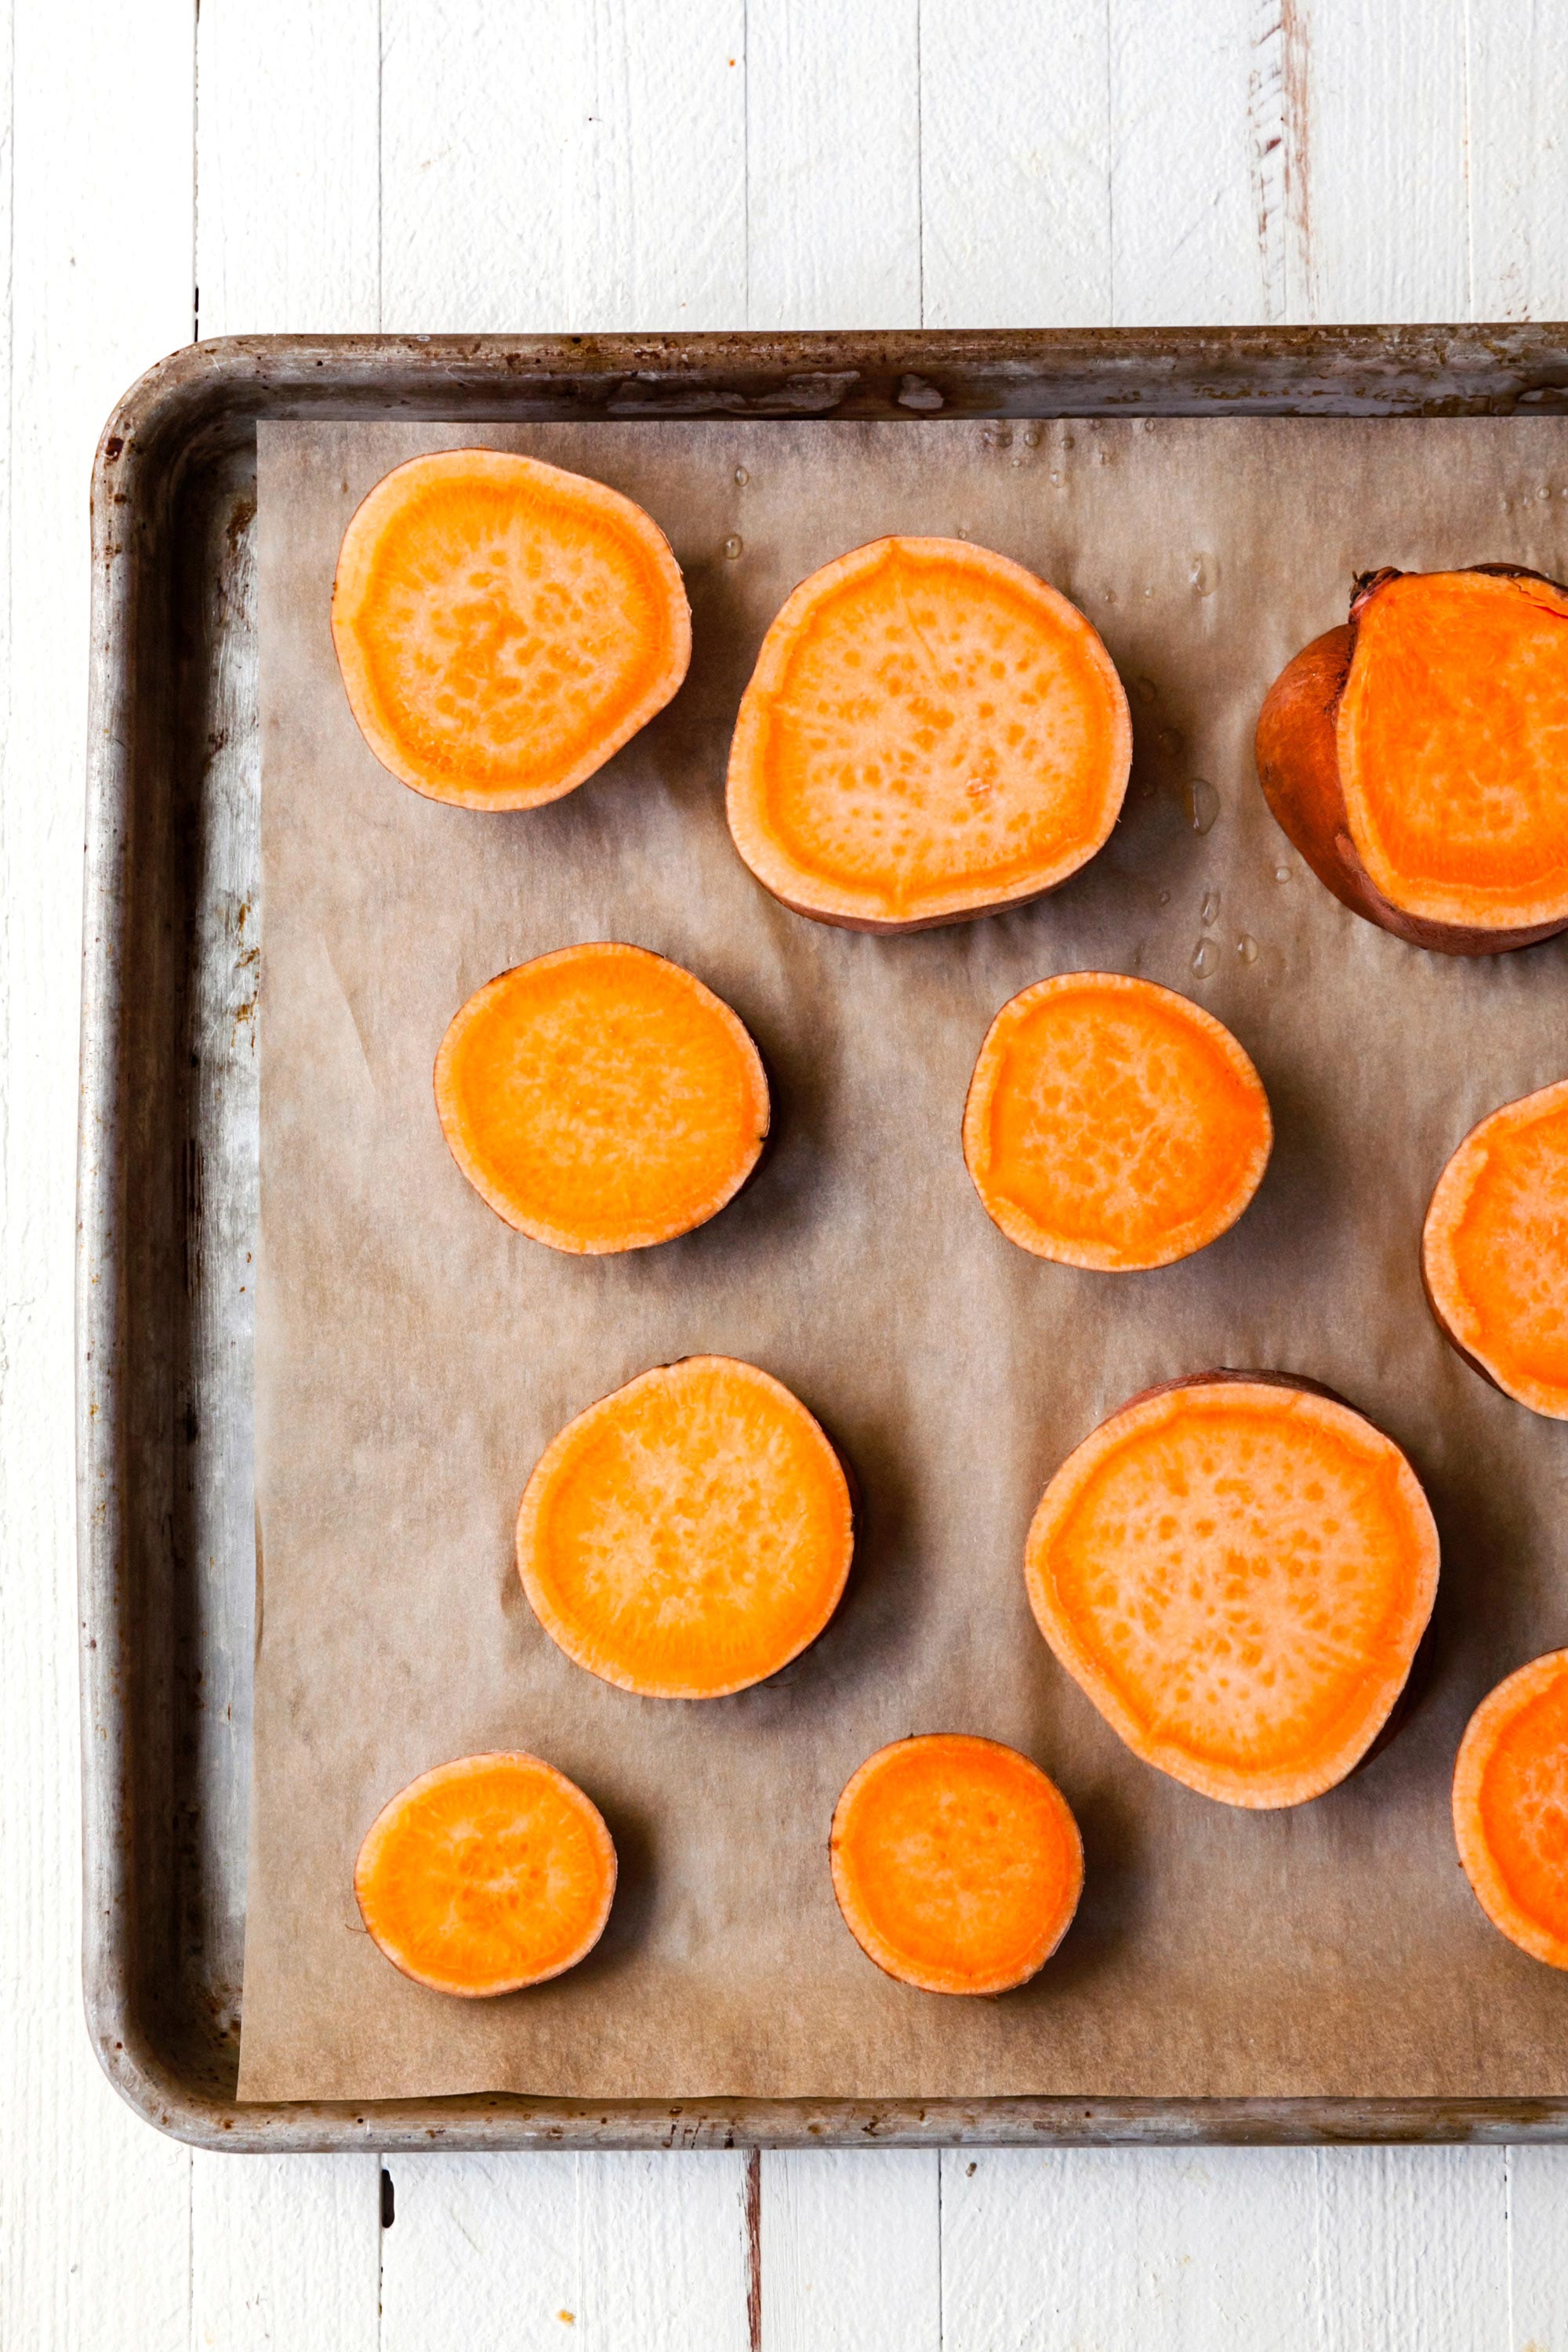 Slices of sweet potato on a parchment lined baking sheet.